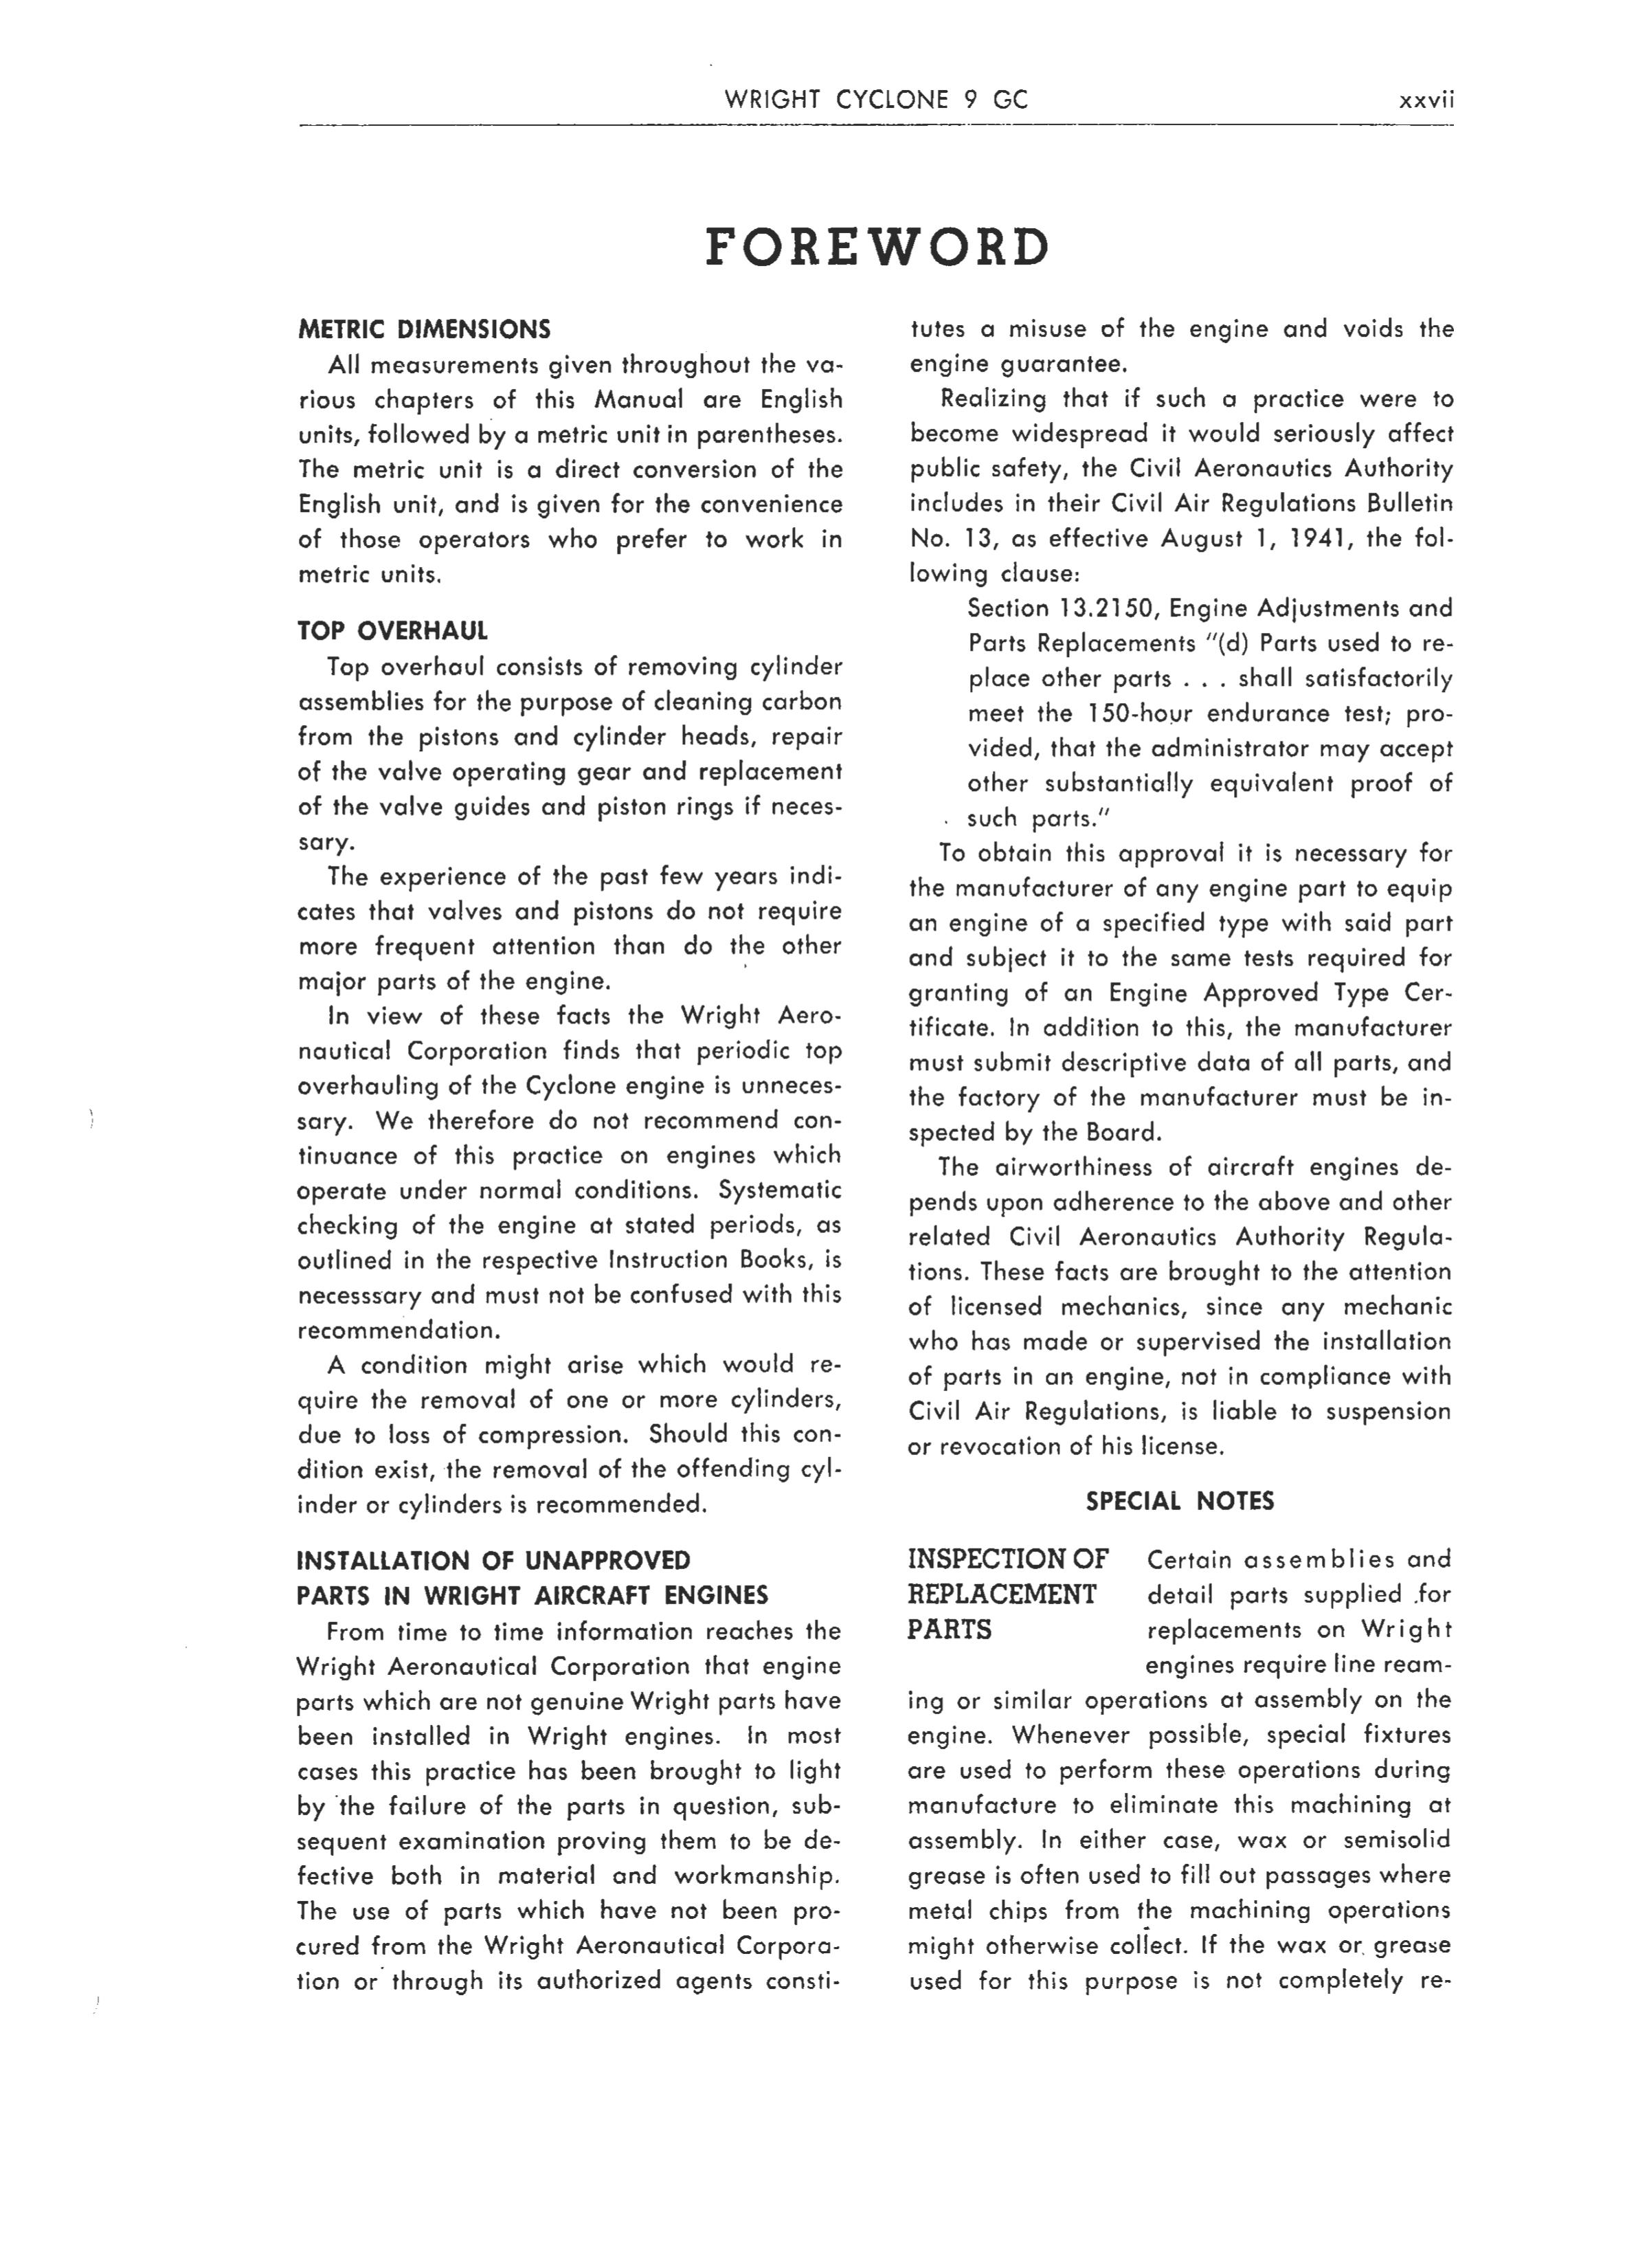 Sample page 23 from AirCorps Library document: Overhaul Manual for Wright Cyclone 9 GC Engines